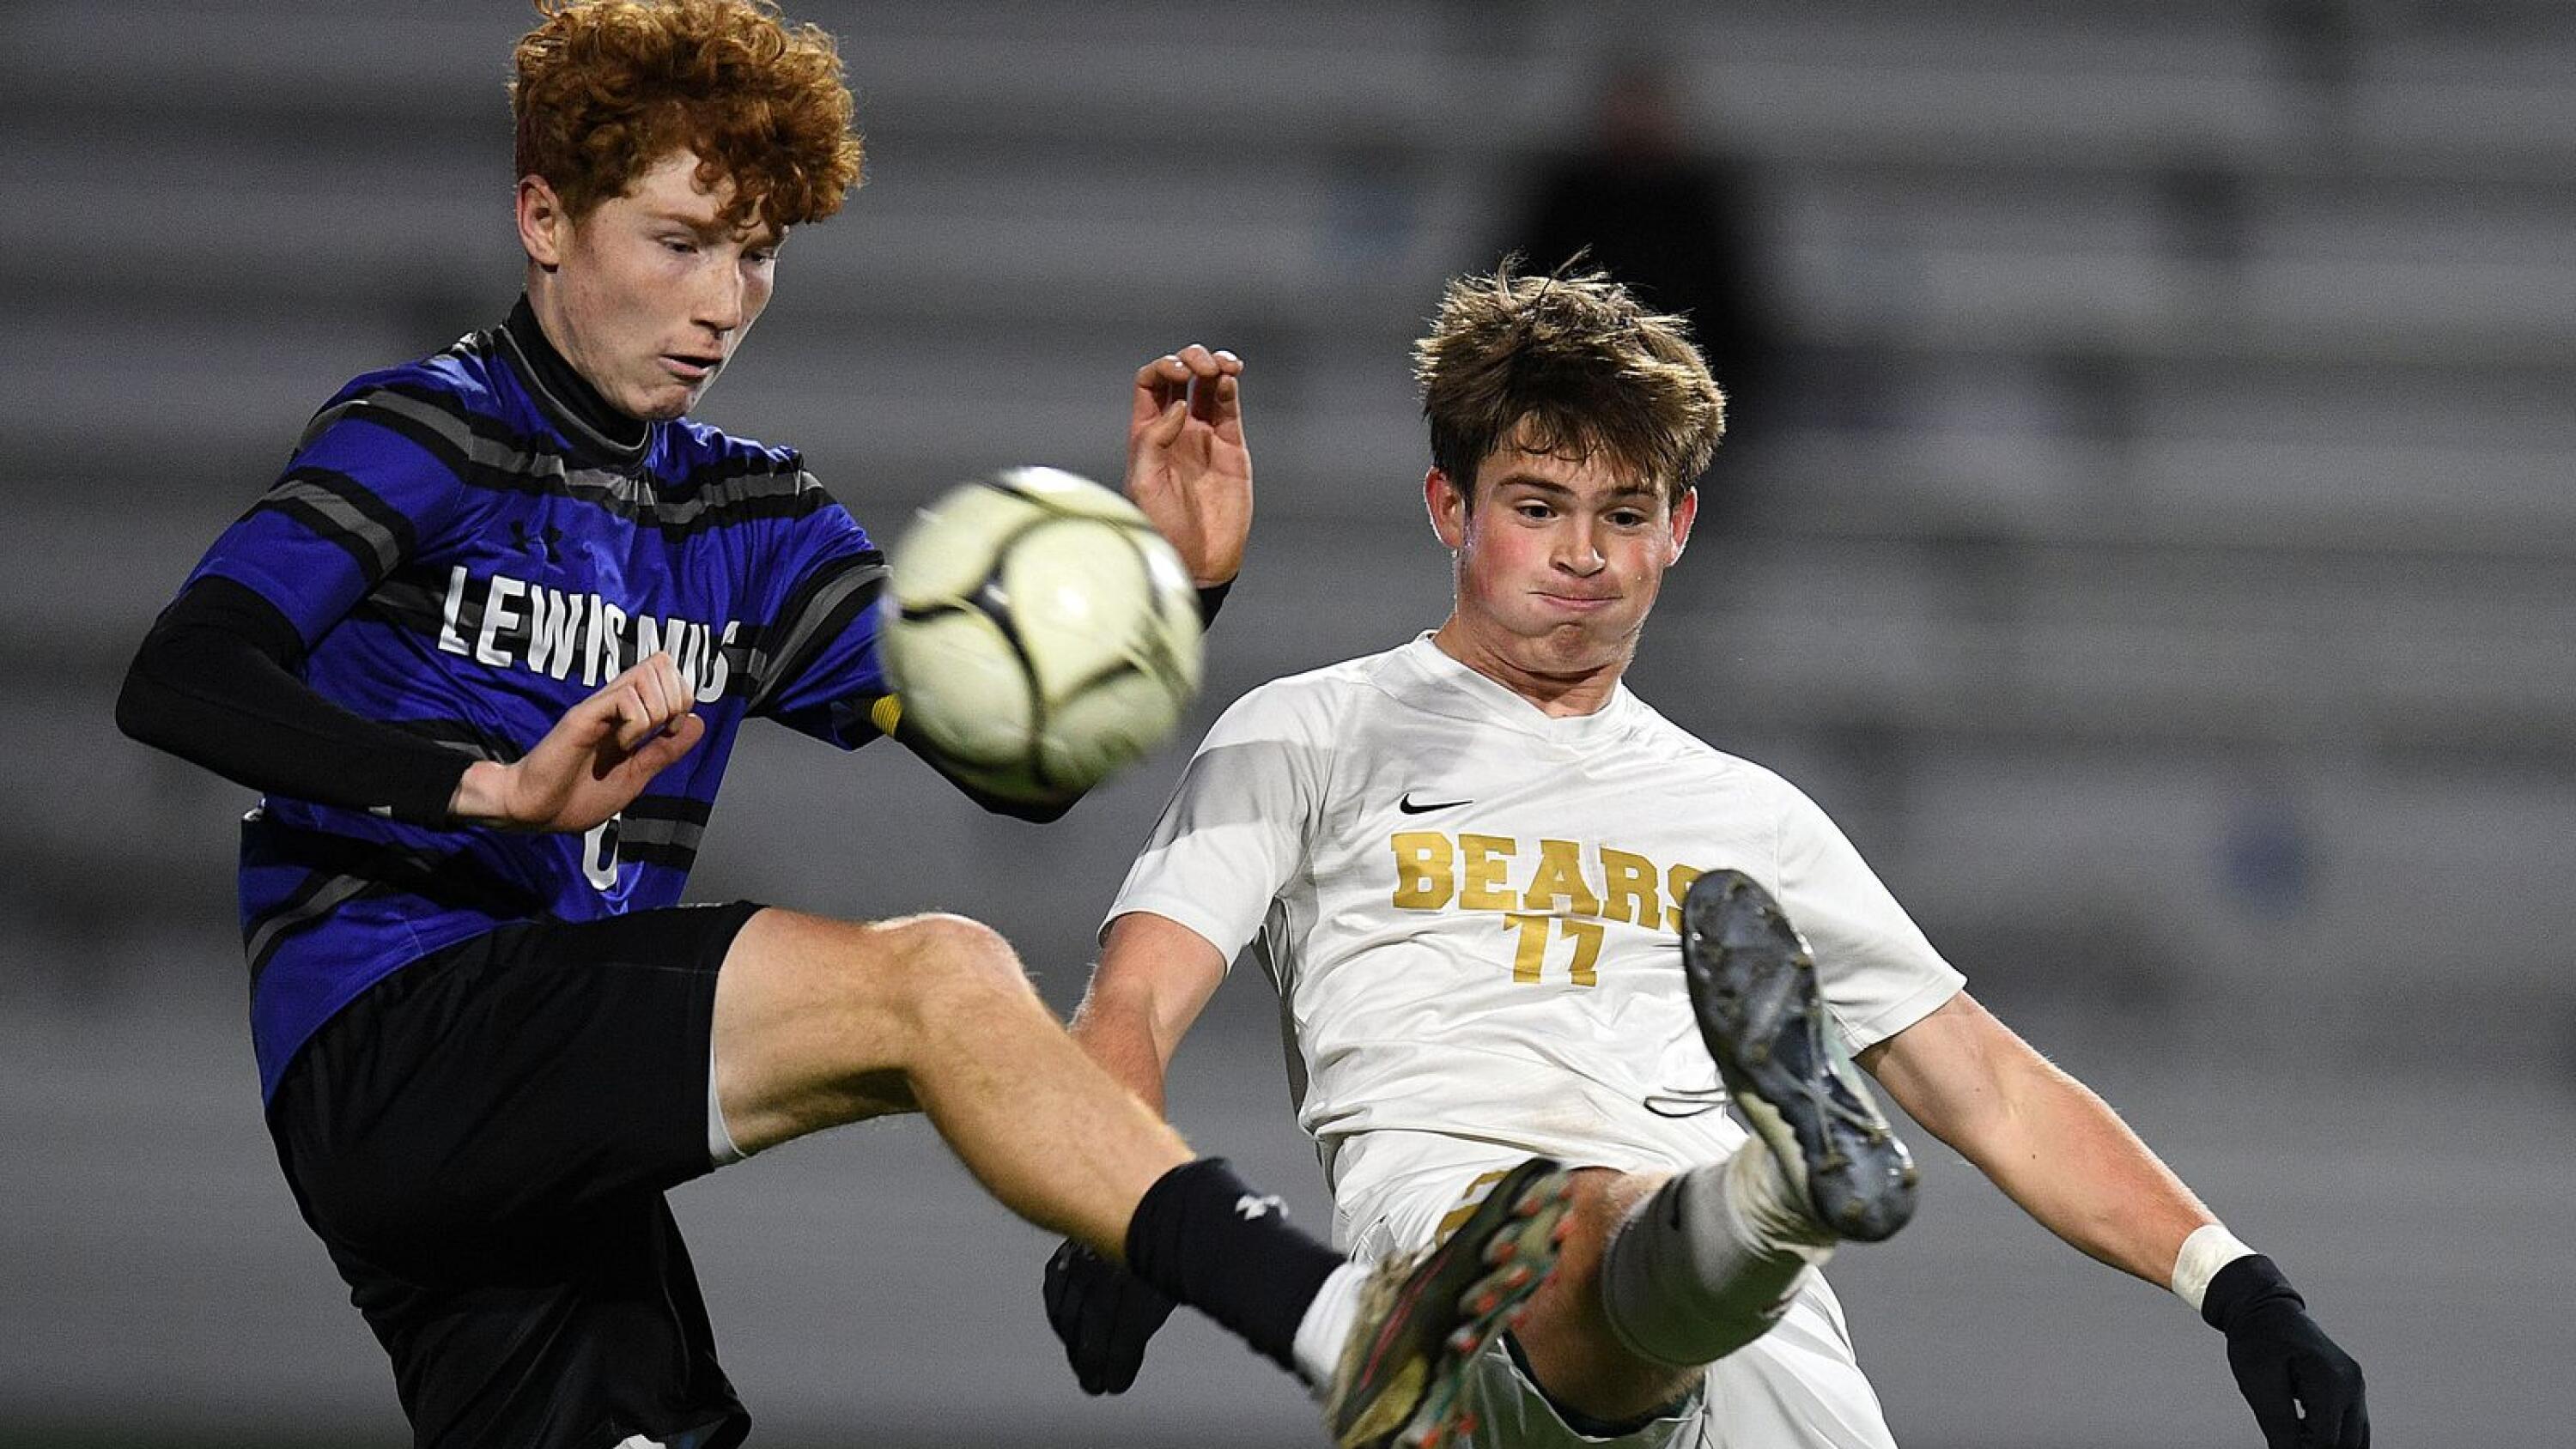 Bears' run comes to an end in Class M final